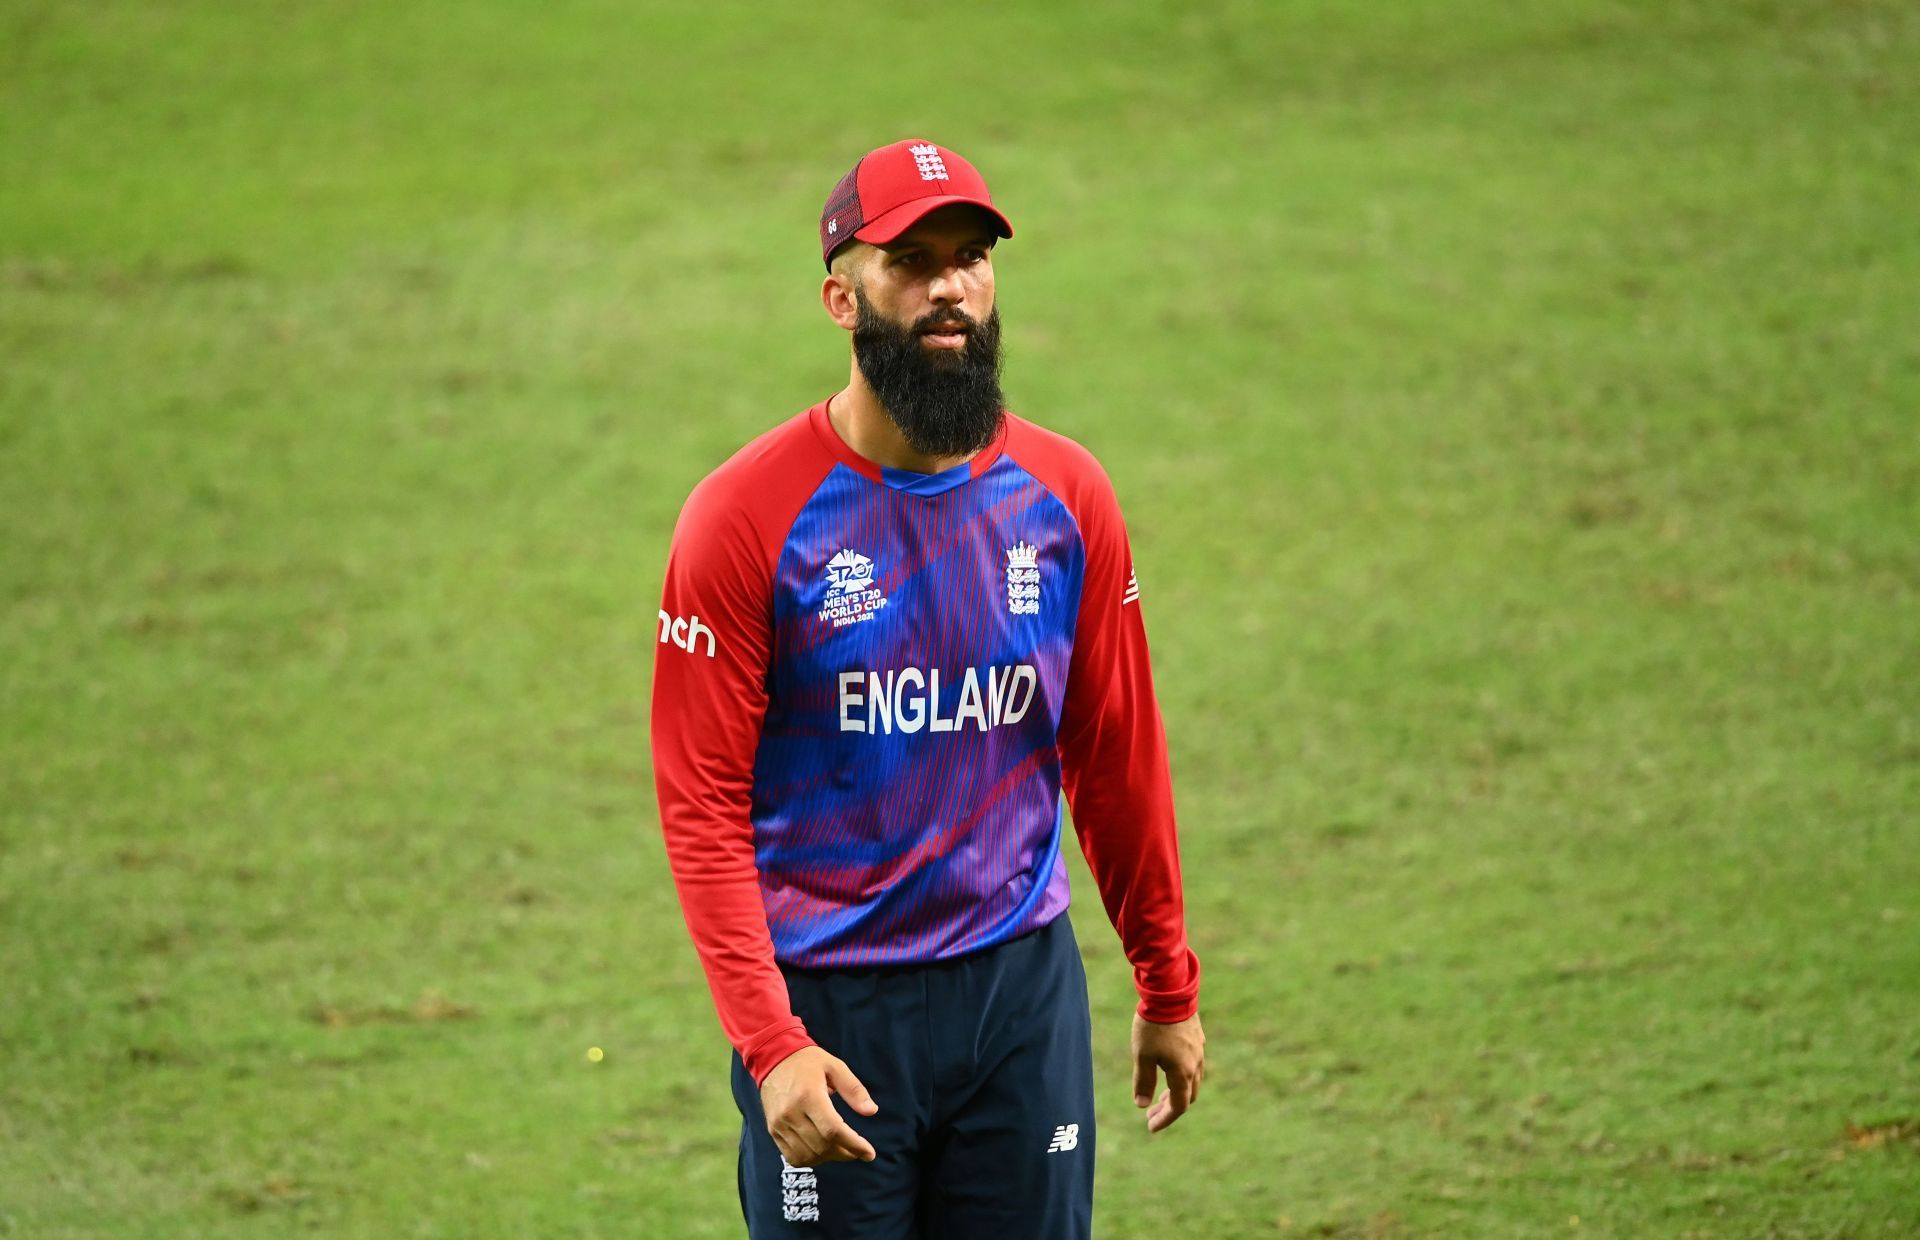 With bat or ball, Moeen Ali was always there to create an impact for England at the T20 World Cup 2021.